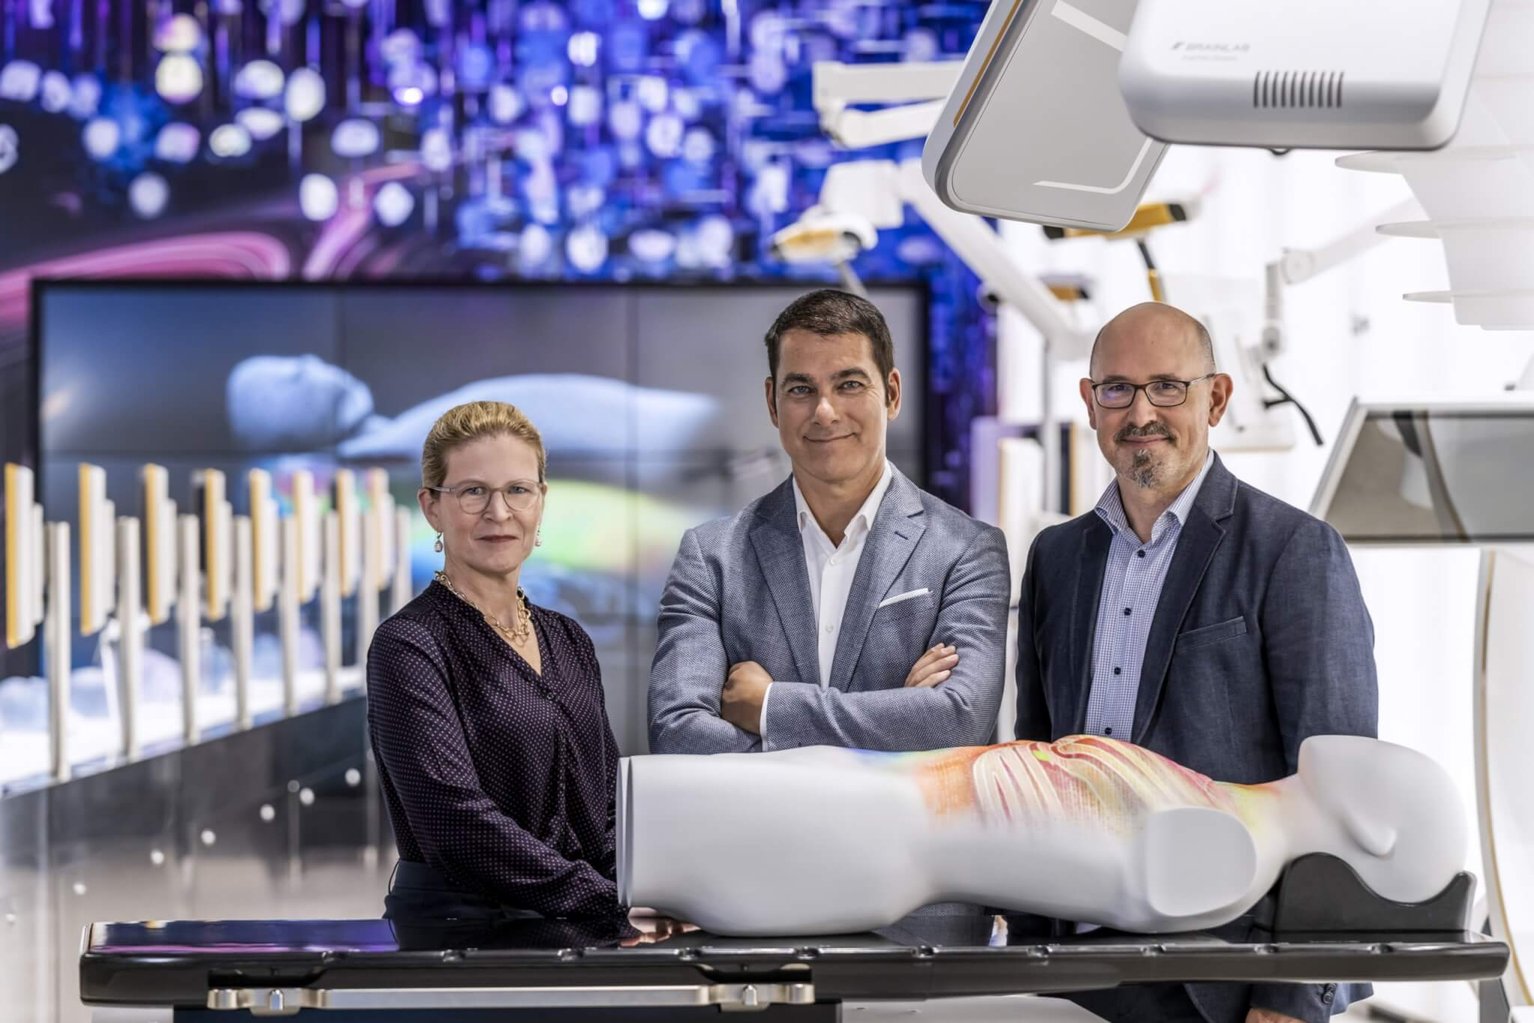 Stefan Vilsmeier, Claus Promberger and Professor Cordula Petersen, MD Receive Nomination for the Federal President’s Award for Innovation and Technology in Germany